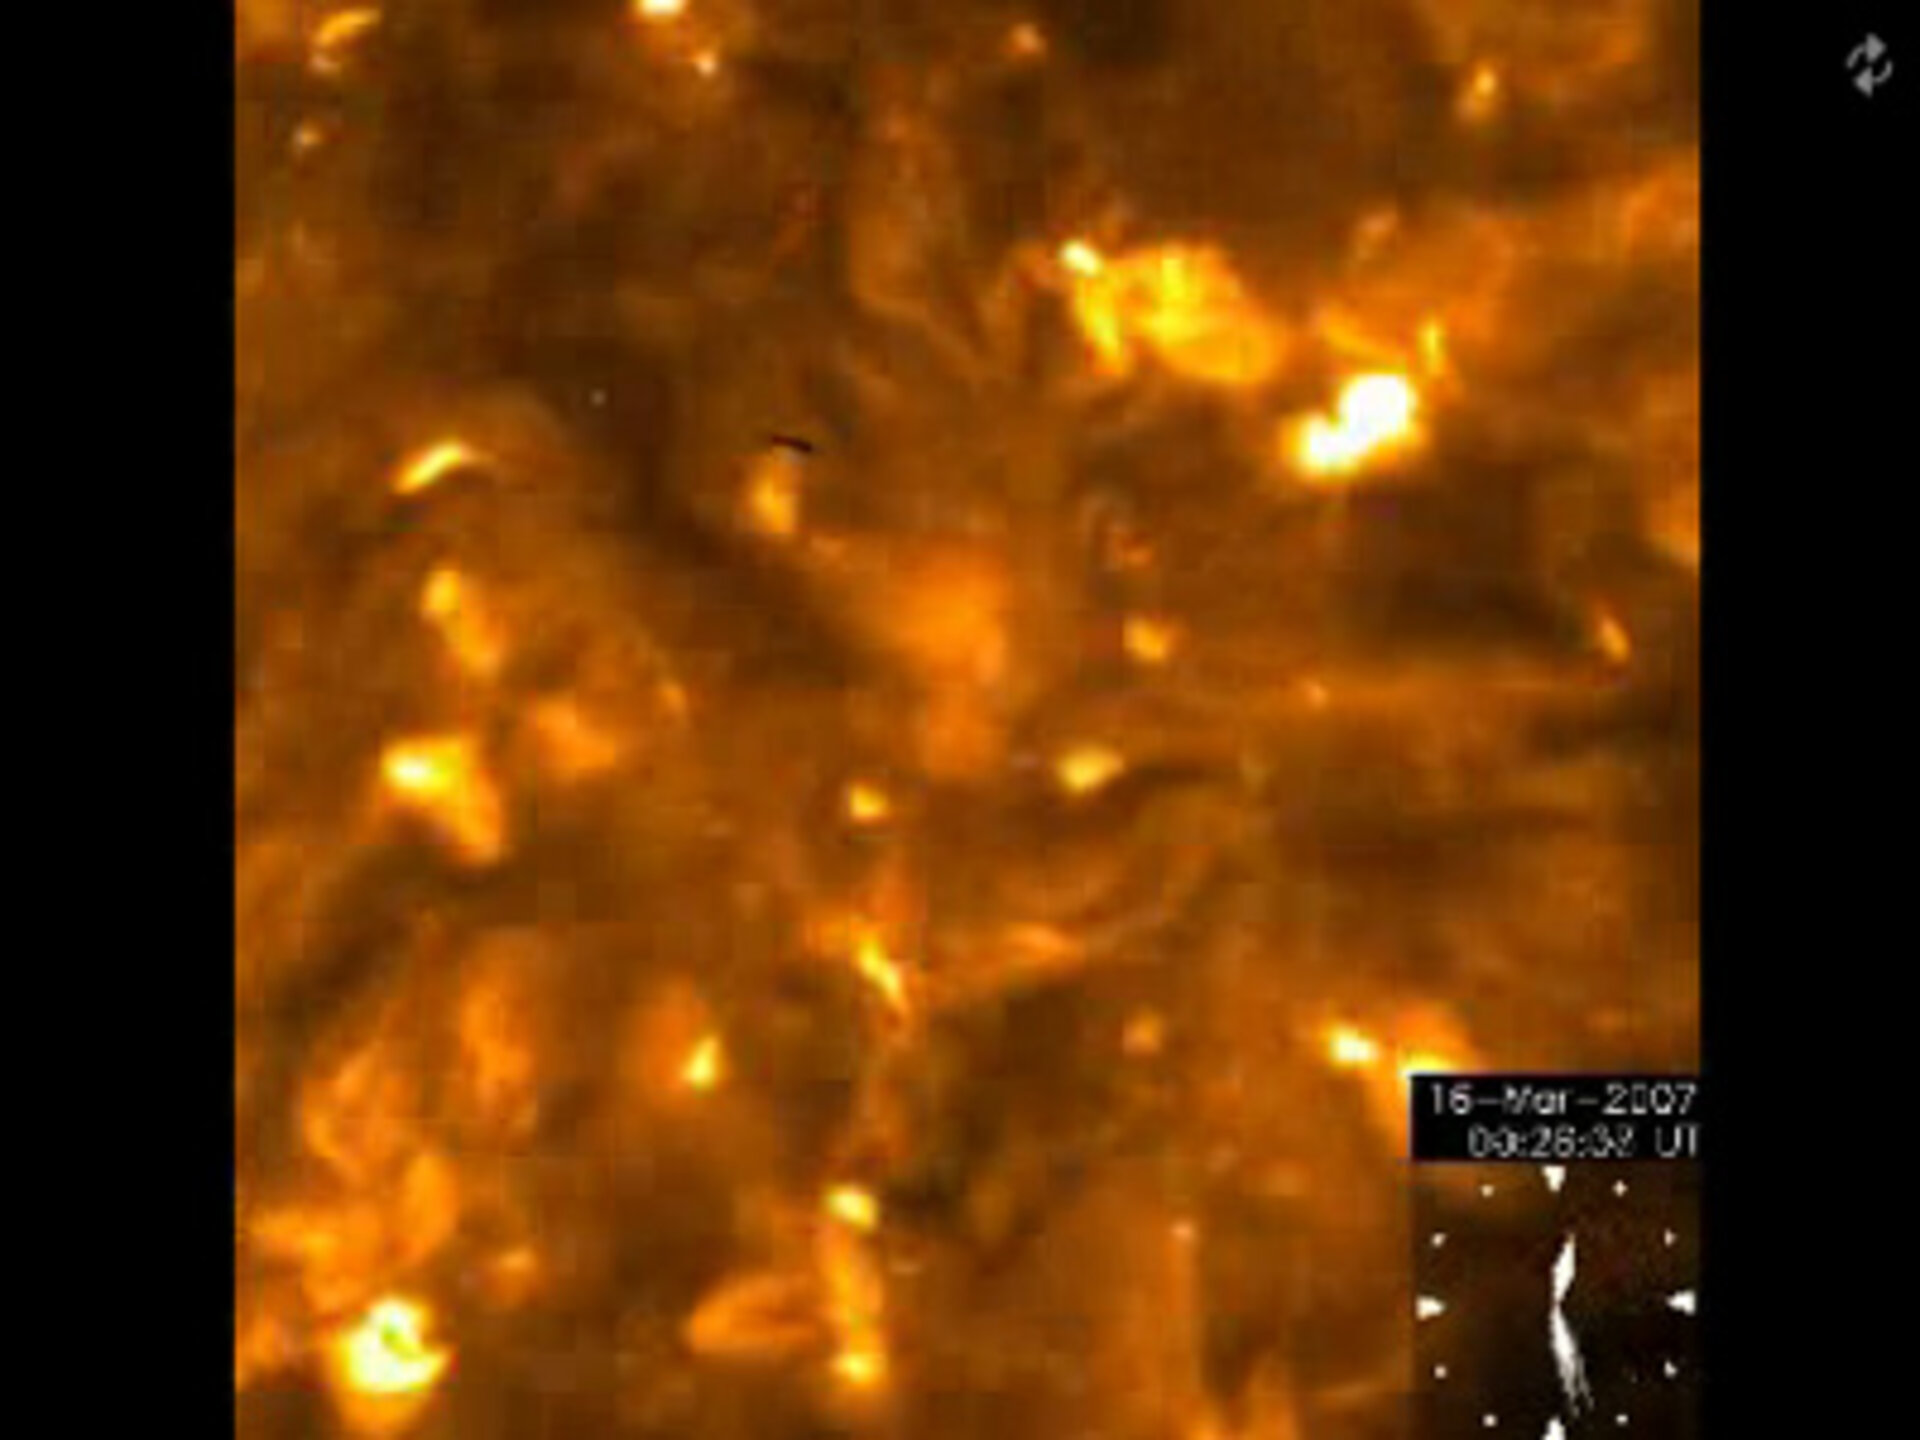 X-ray-bright spots on the solar surface